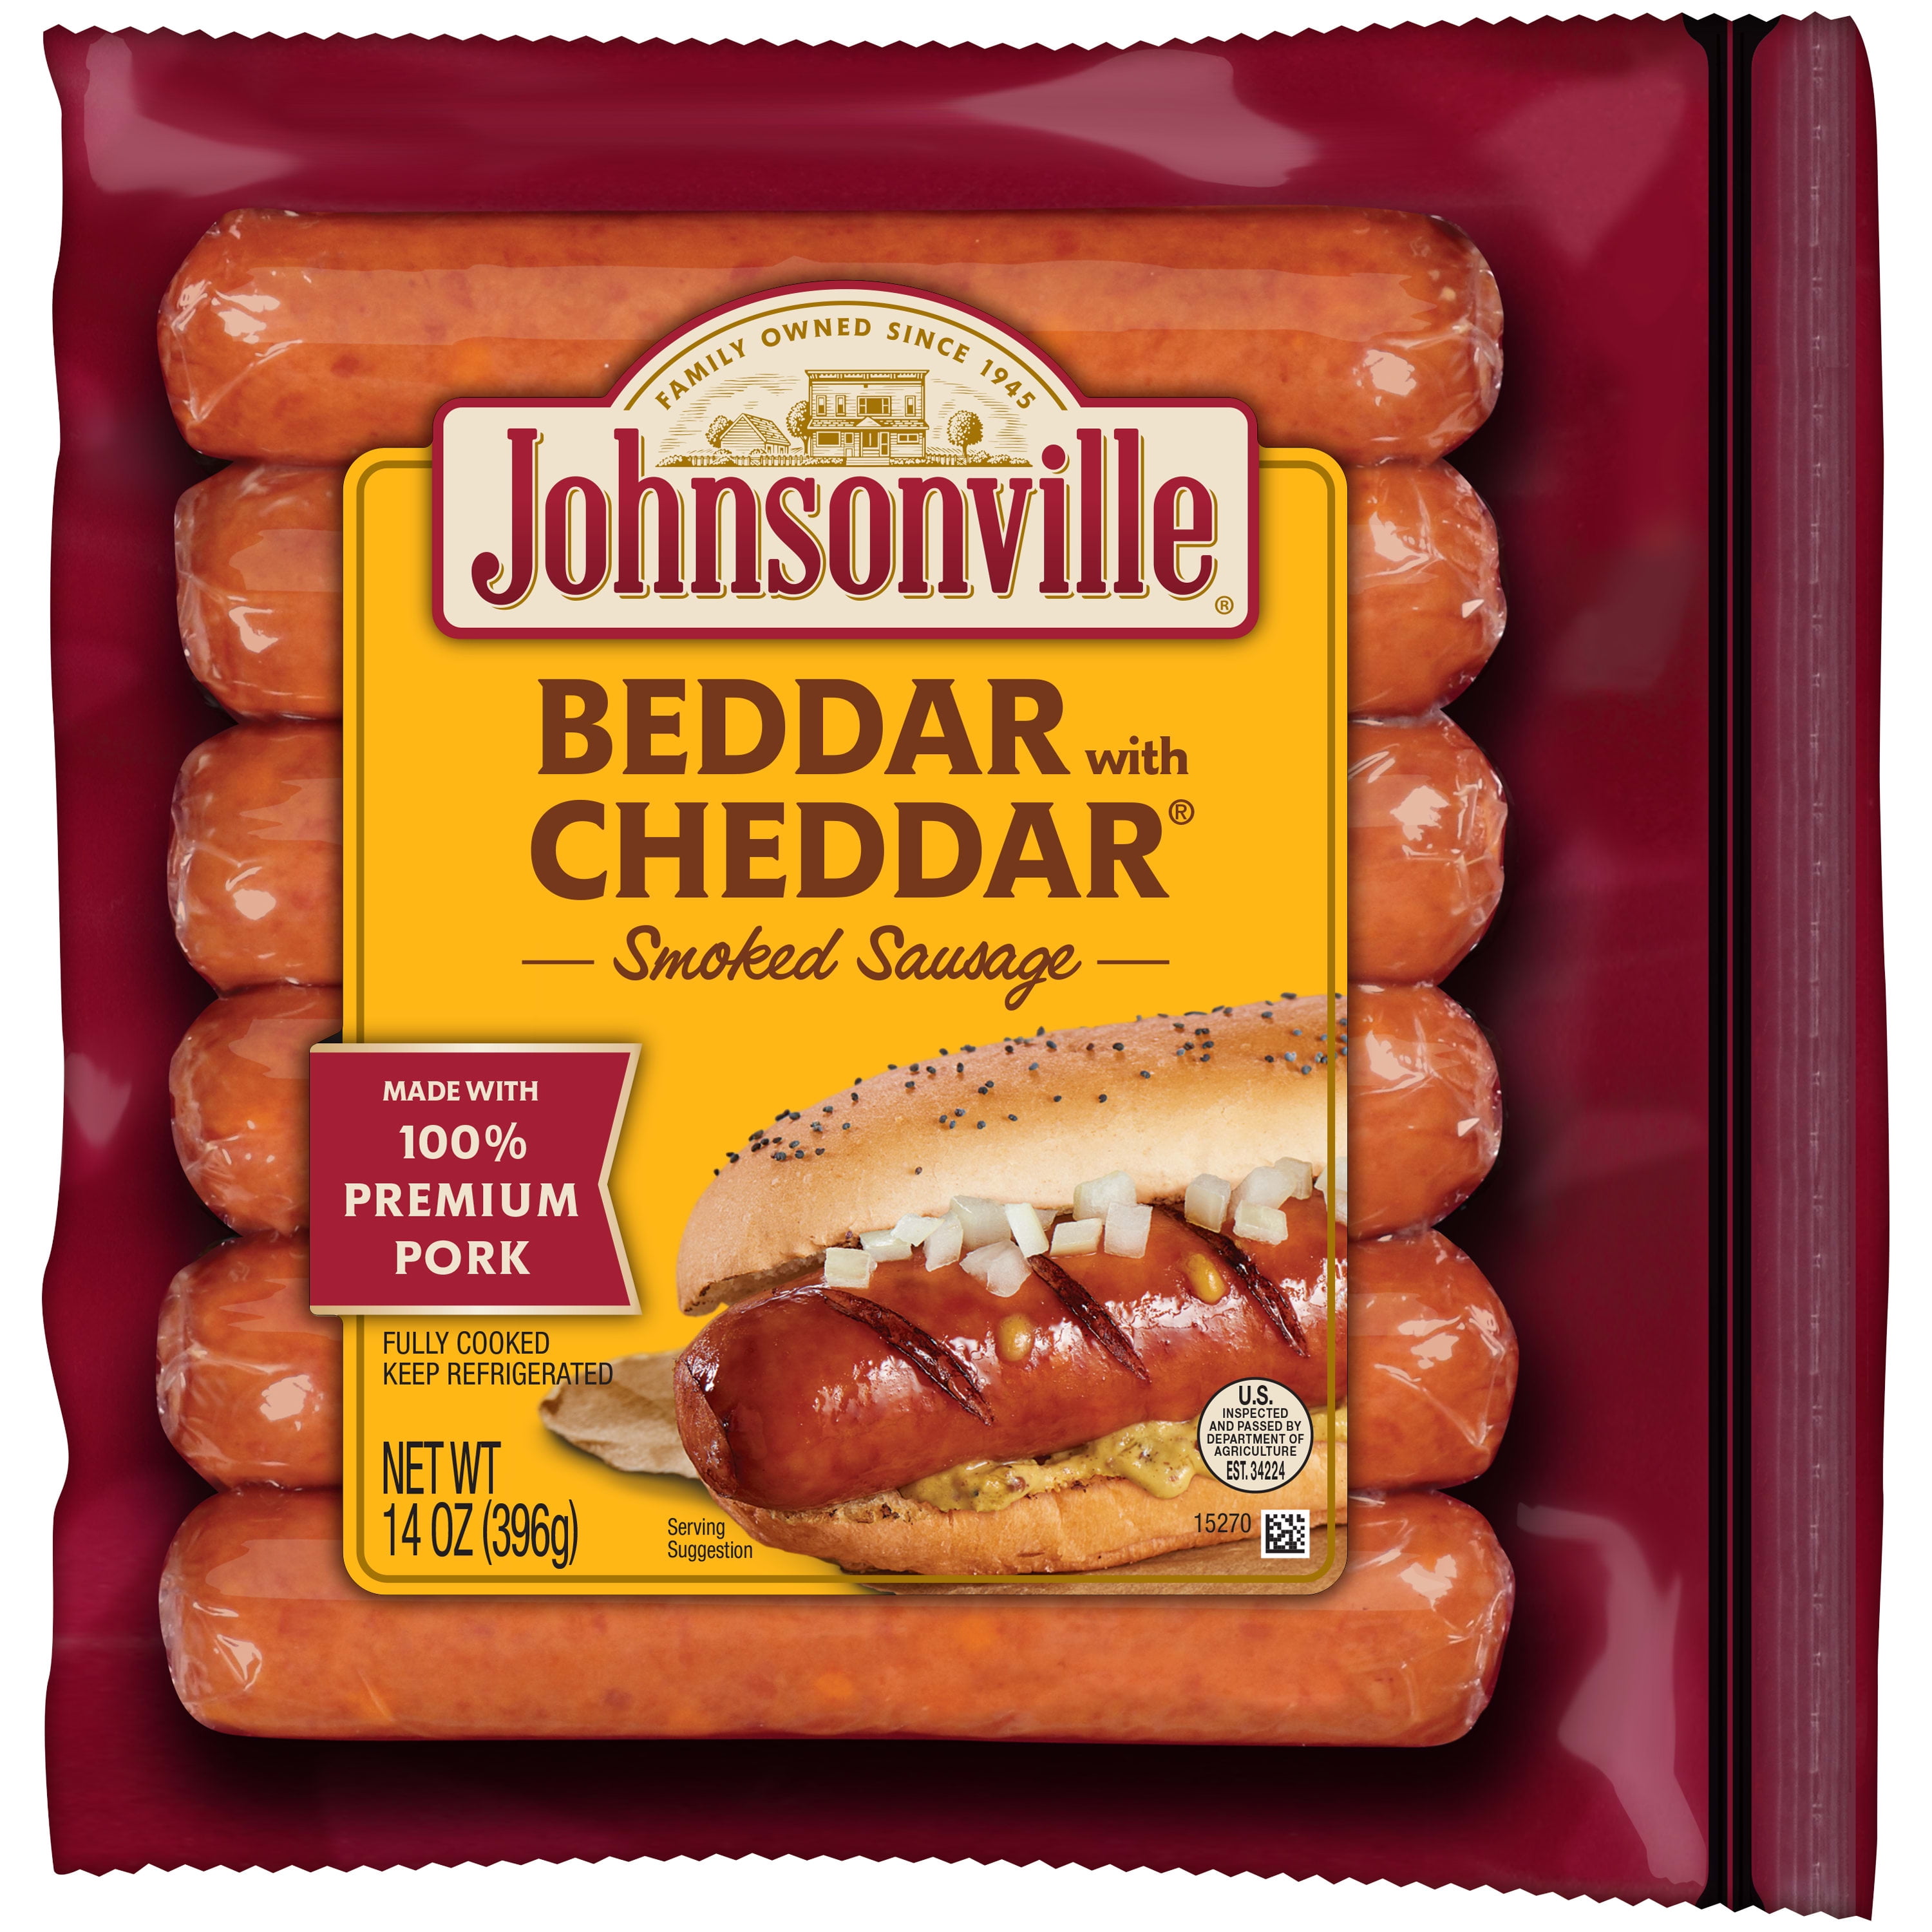 Johnsonville Beddar With Cheddar Smoked Sausage, 6 Ct, 14 oz